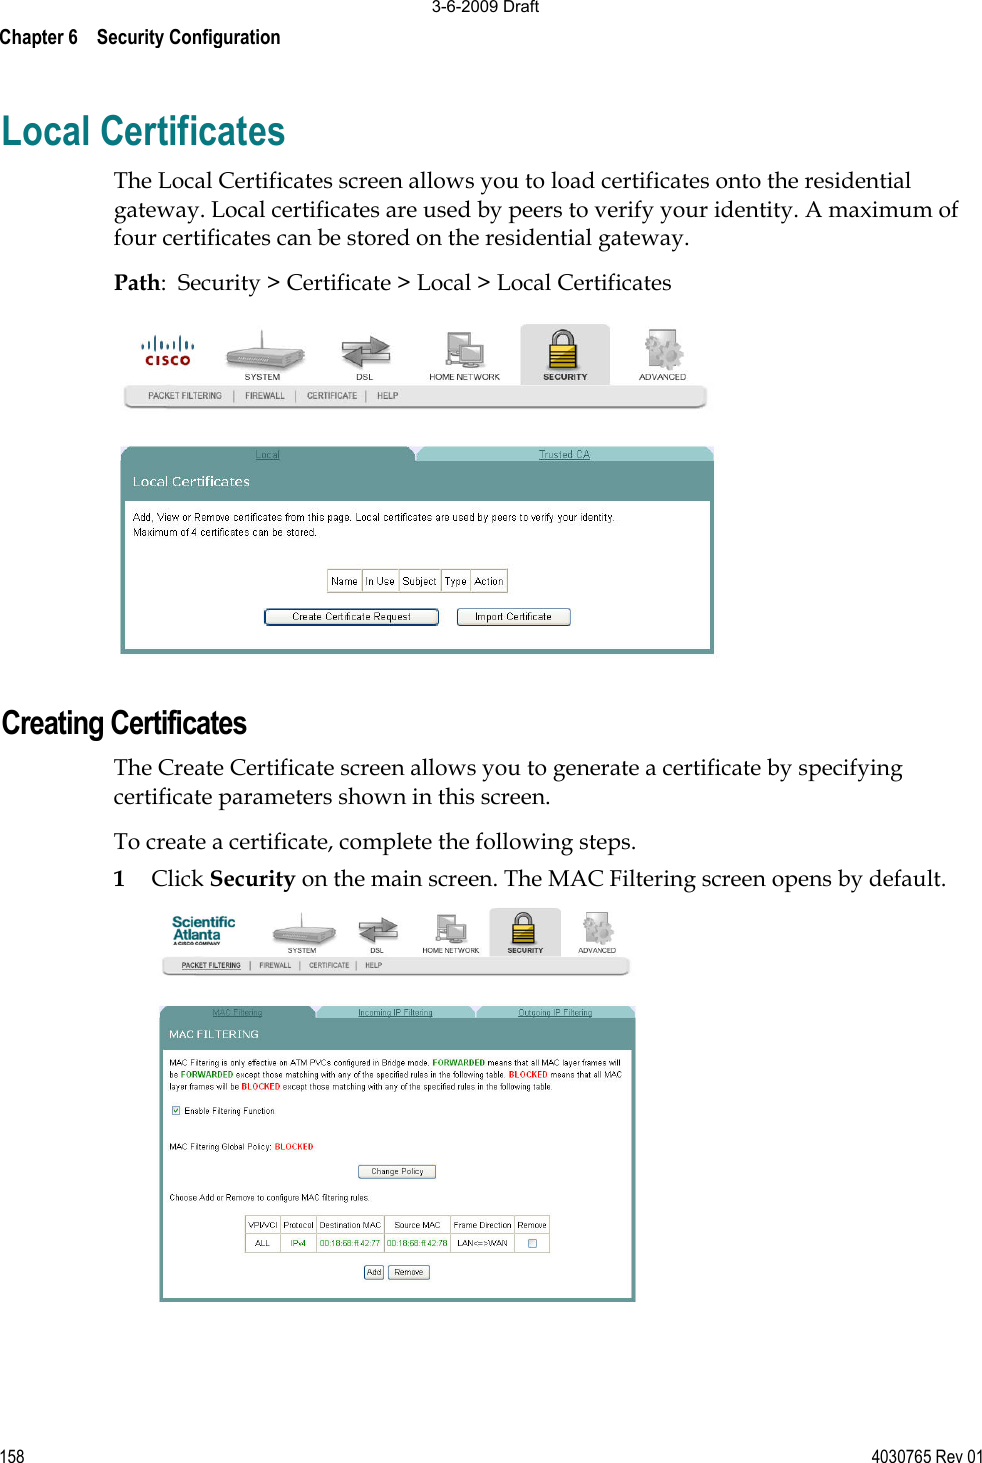 Chapter 6    Security Configuration 158 4030765 Rev 01Local Certificates The Local Certificates screen allows you to load certificates onto the residential gateway. Local certificates are used by peers to verify your identity. A maximum of four certificates can be stored on the residential gateway. Path:  Security &gt; Certificate &gt; Local &gt; Local Certificates Creating Certificates The Create Certificate screen allows you to generate a certificate by specifying certificate parameters shown in this screen. To create a certificate, complete the following steps. 1Click Security on the main screen. The MAC Filtering screen opens by default. 3-6-2009 Draft